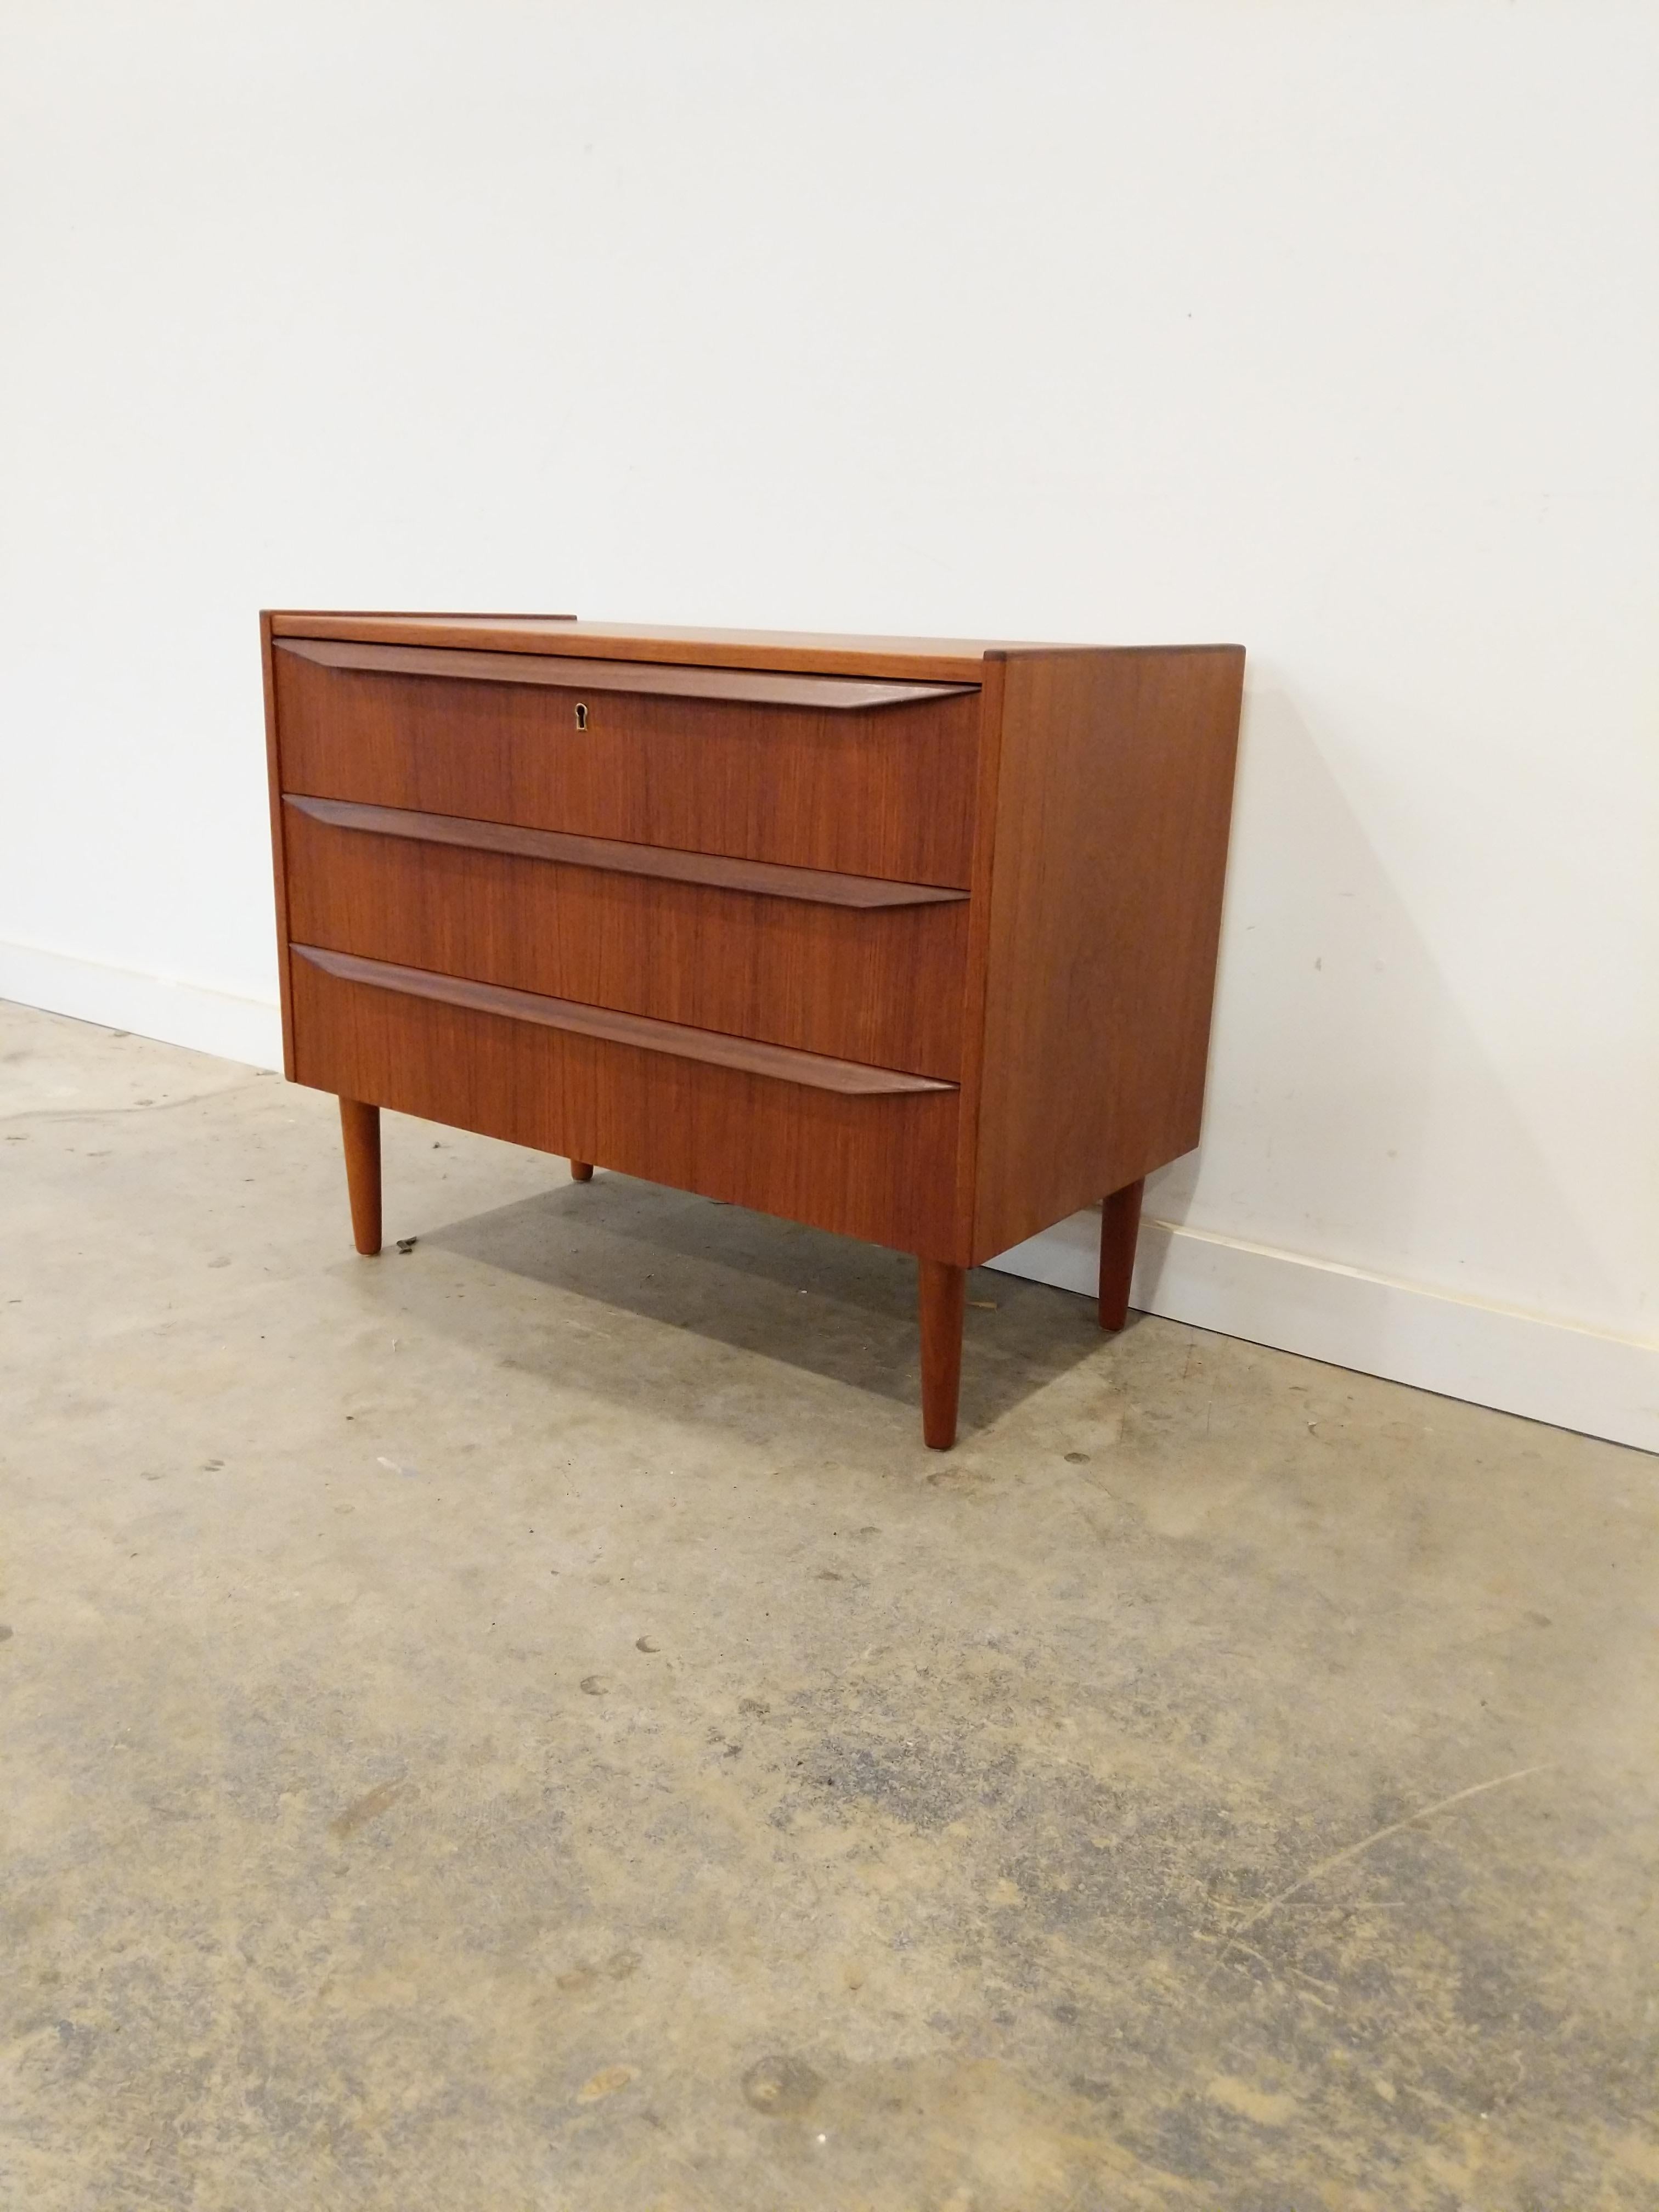 Authentic vintage mid century Danish / Scandinavian Modern teak low dresser / chest of drawers.

This piece is in excellent refinished condition with very few signs of age-related wear (see photos).

If you would like any additional details, please